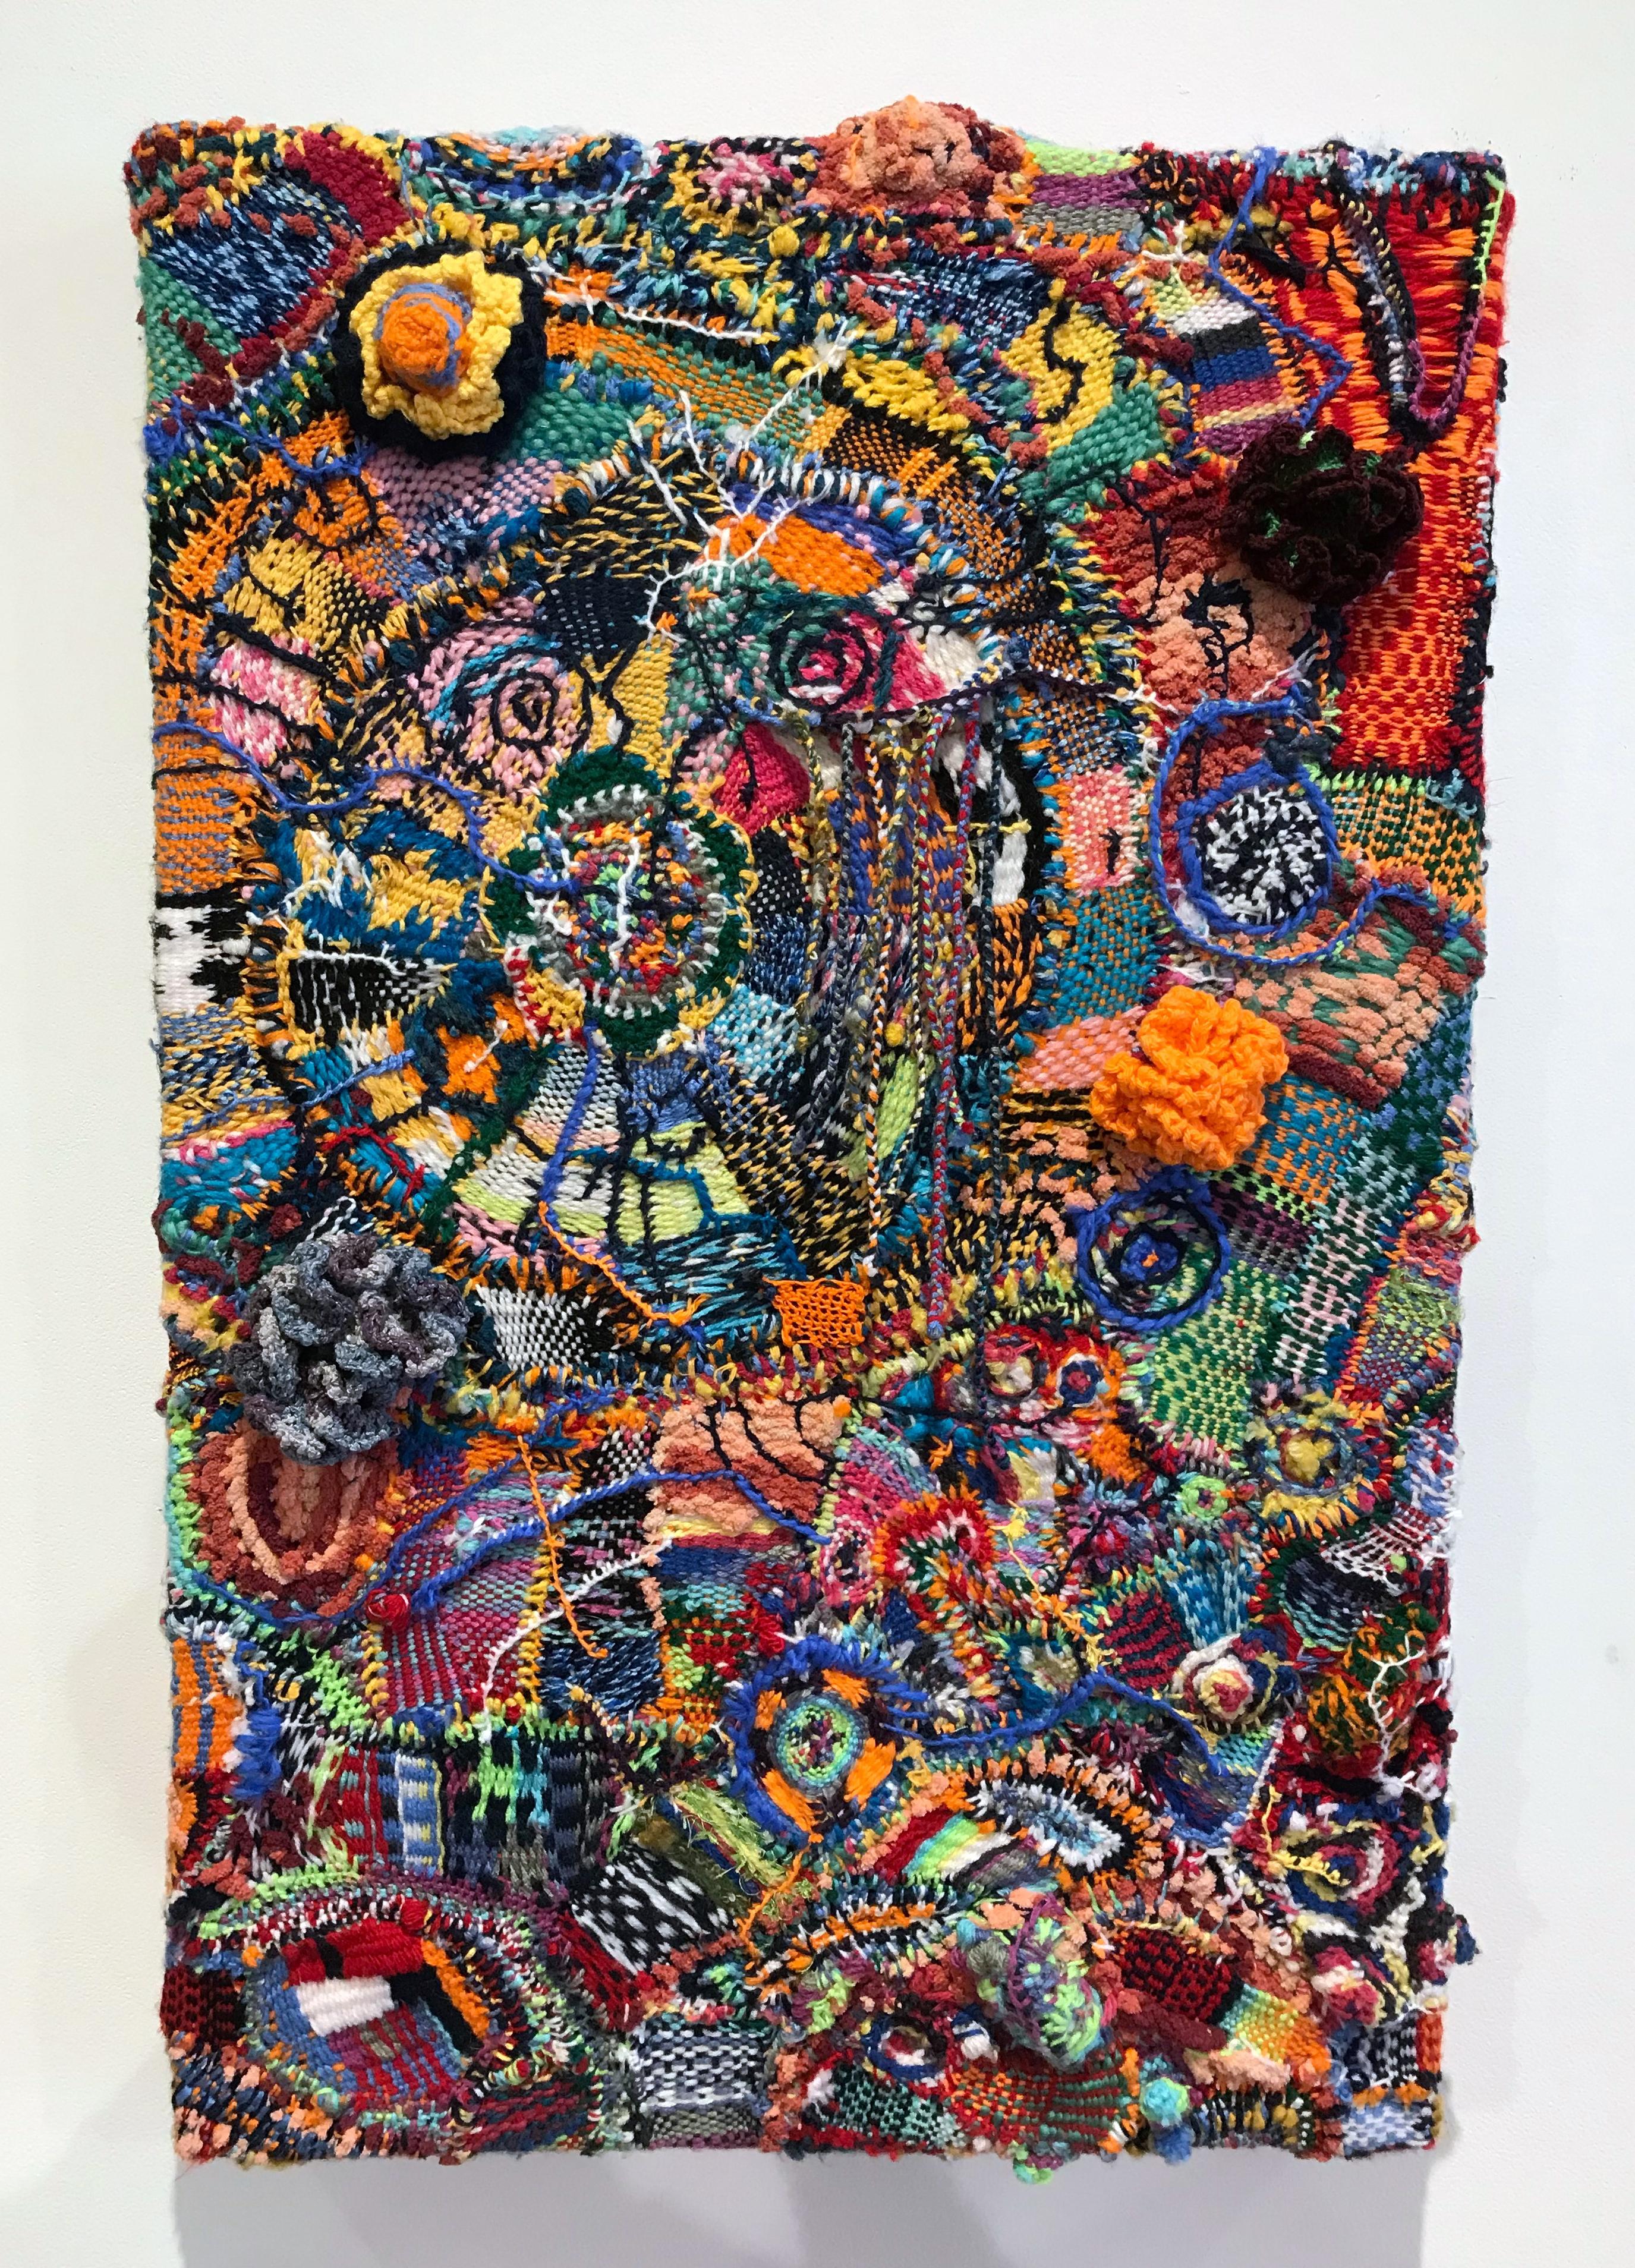 "Dissolution of the Ego", Contemporary, Textile, Hand Woven, Stitched, Yarn - Art by Ethan Meyer